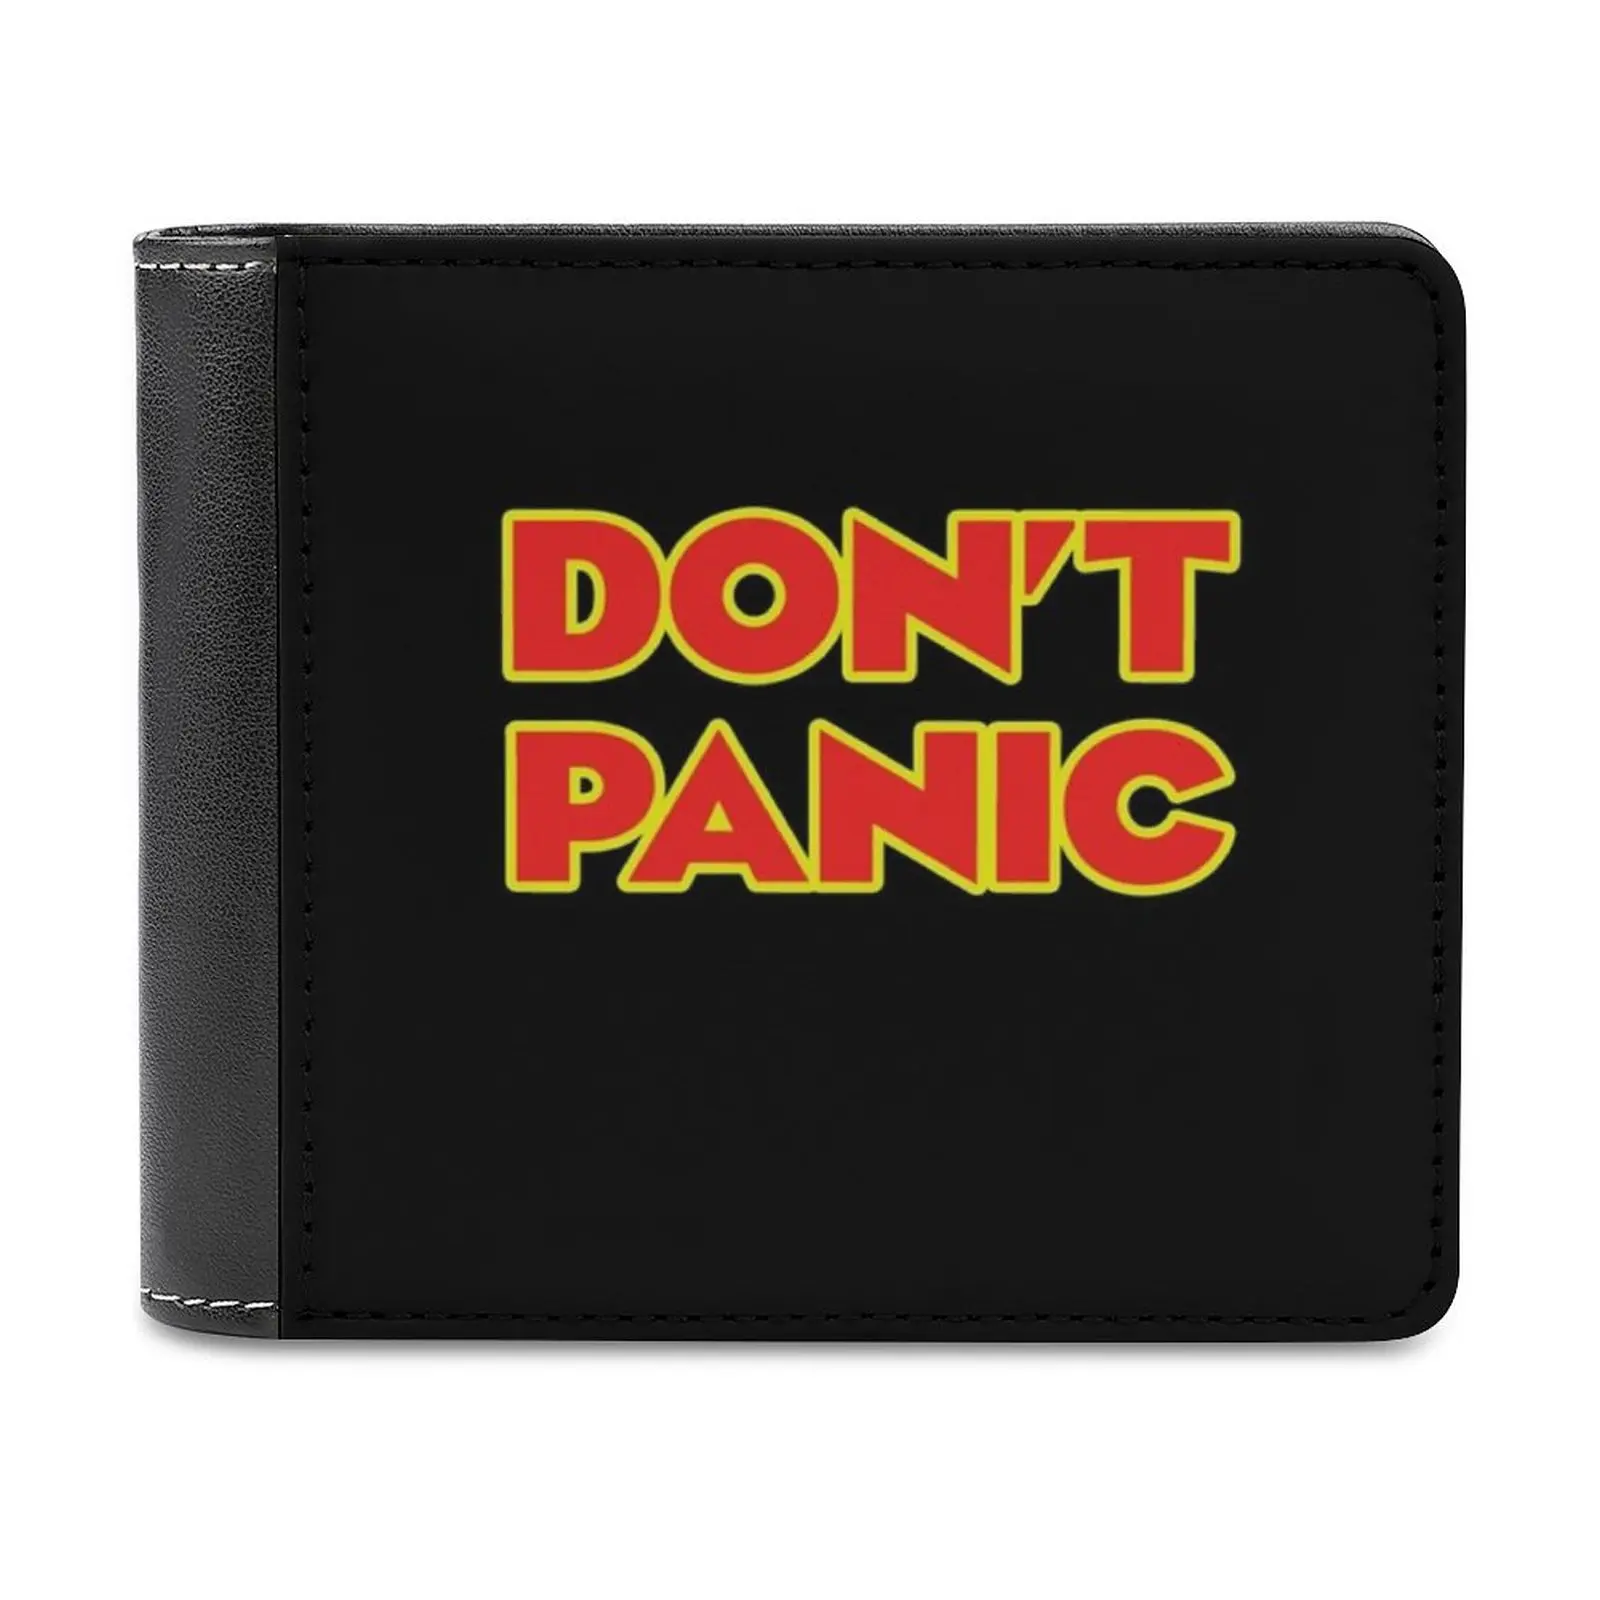 

Leather Wallet Men's Wallet Diy Personalized Purse Father'S Day Gift Hggttg Hhgttg Hitch Hikers Guide Dont Panic Dont Panic